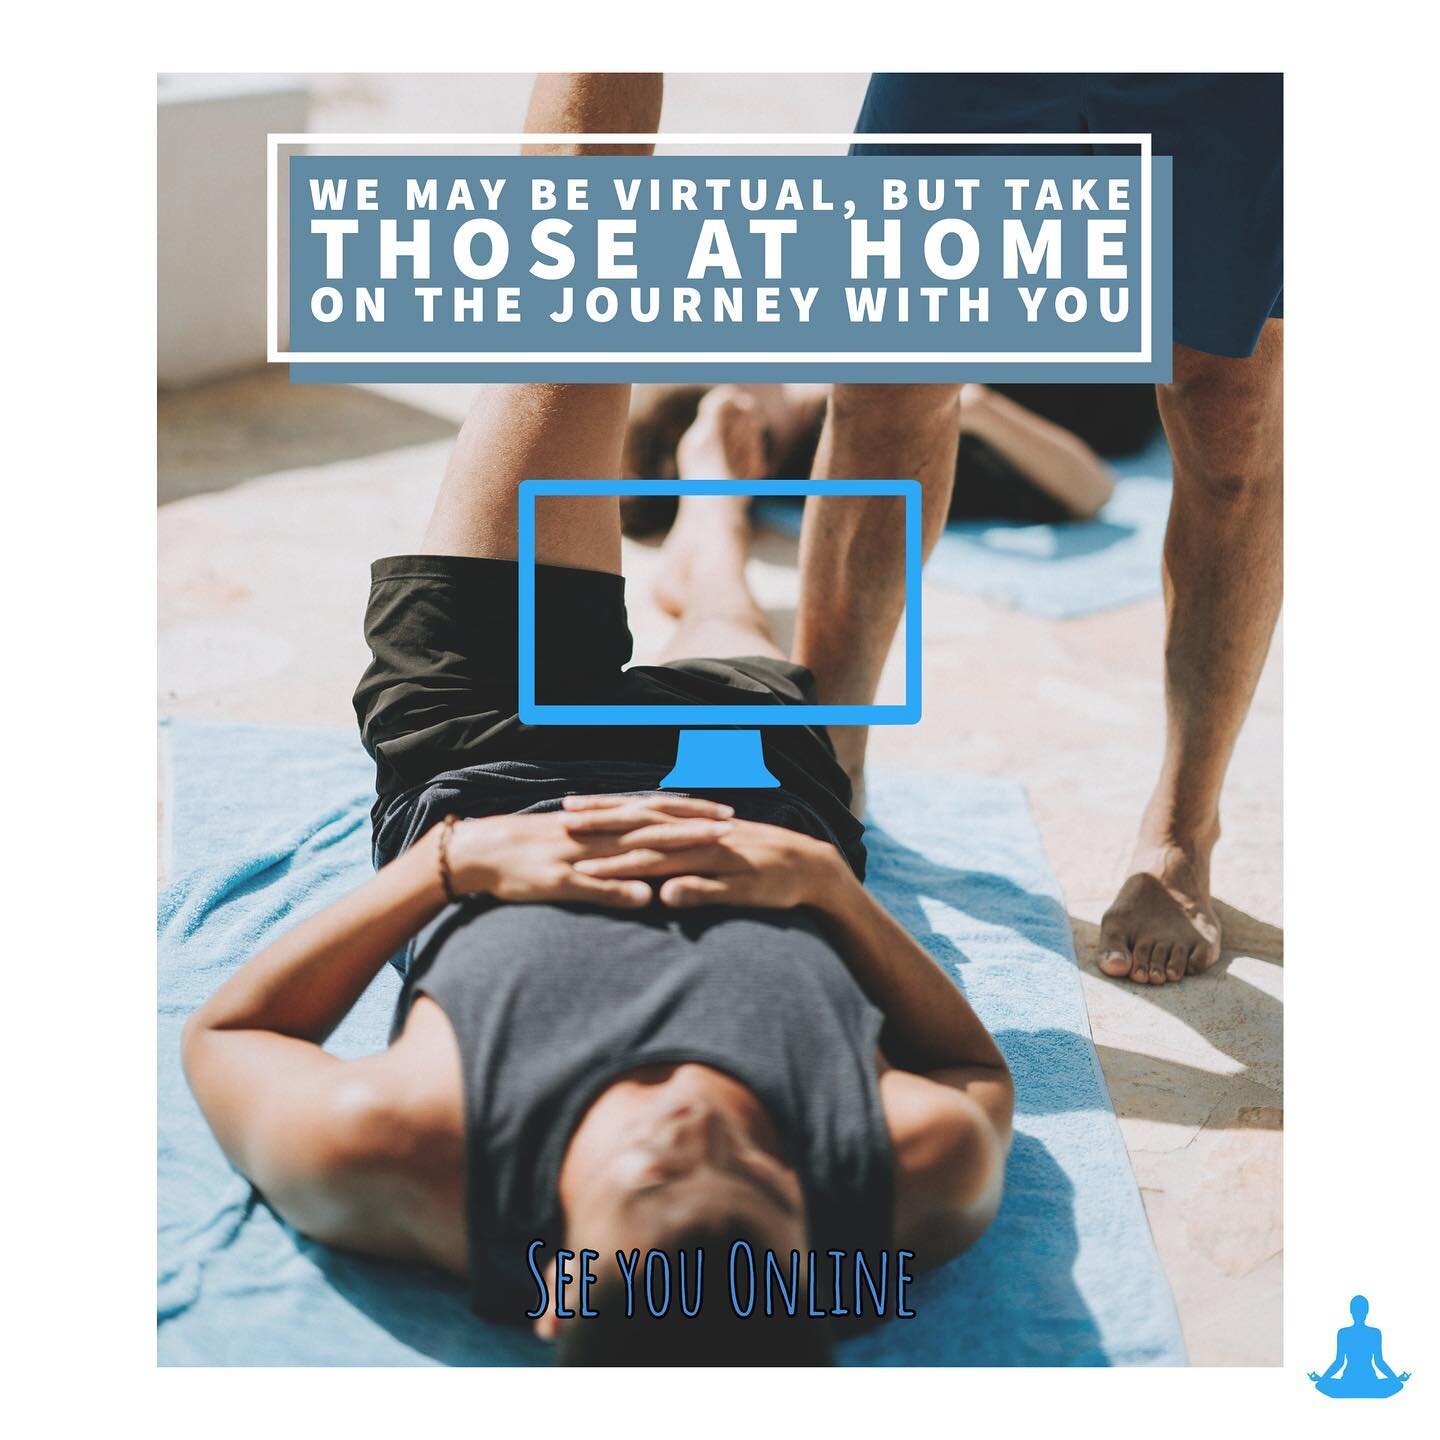 So we&rsquo;re still online.. but the best part about that is being able to connect with all of you at home. We know working out and practicing yoga from home may not be ideal, or easy but that&rsquo;s why we welcome you to bring those around you onl